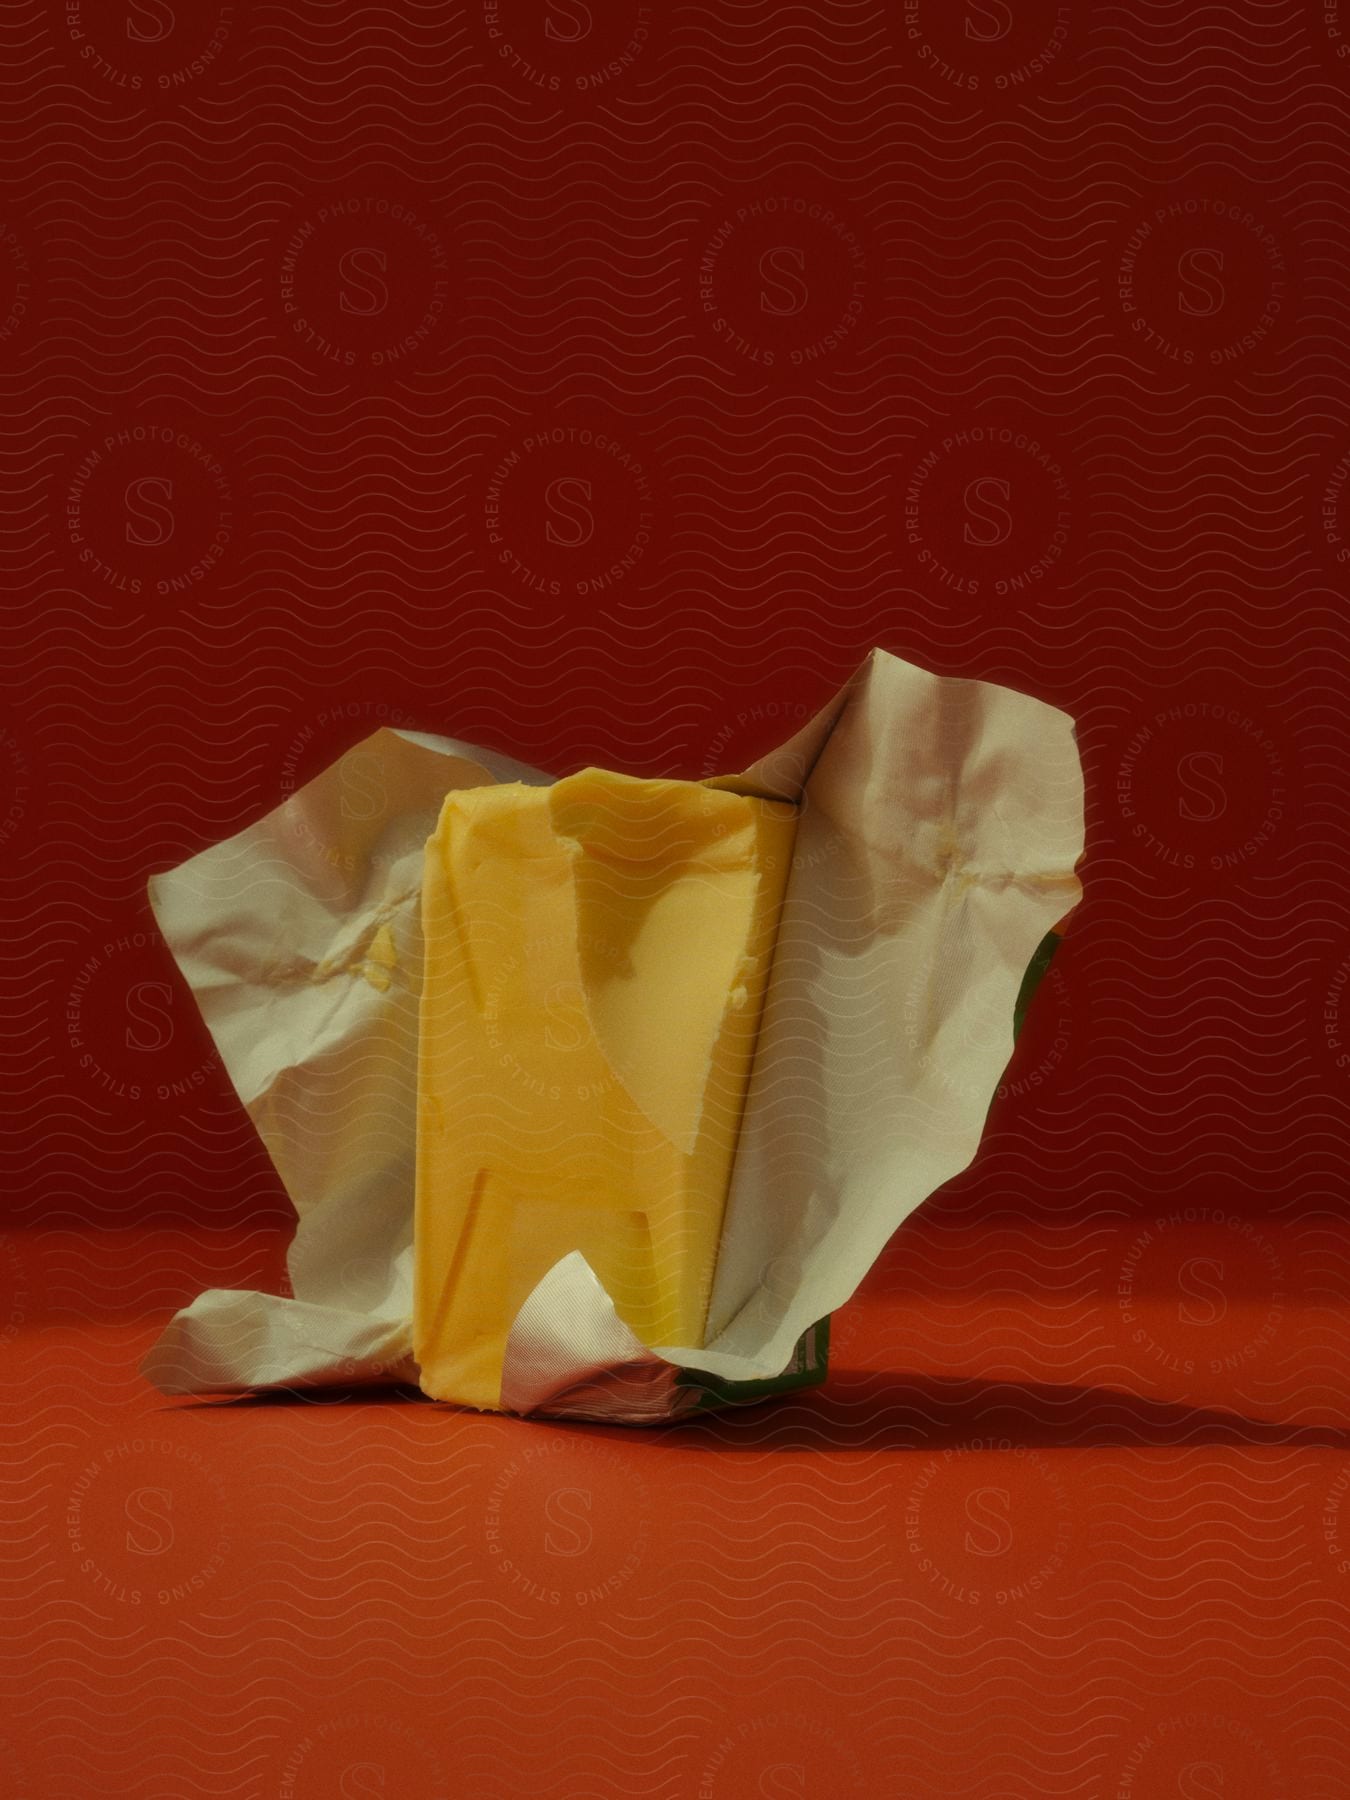 Piece of butter partially wrapped in packaging, placed against a red background.